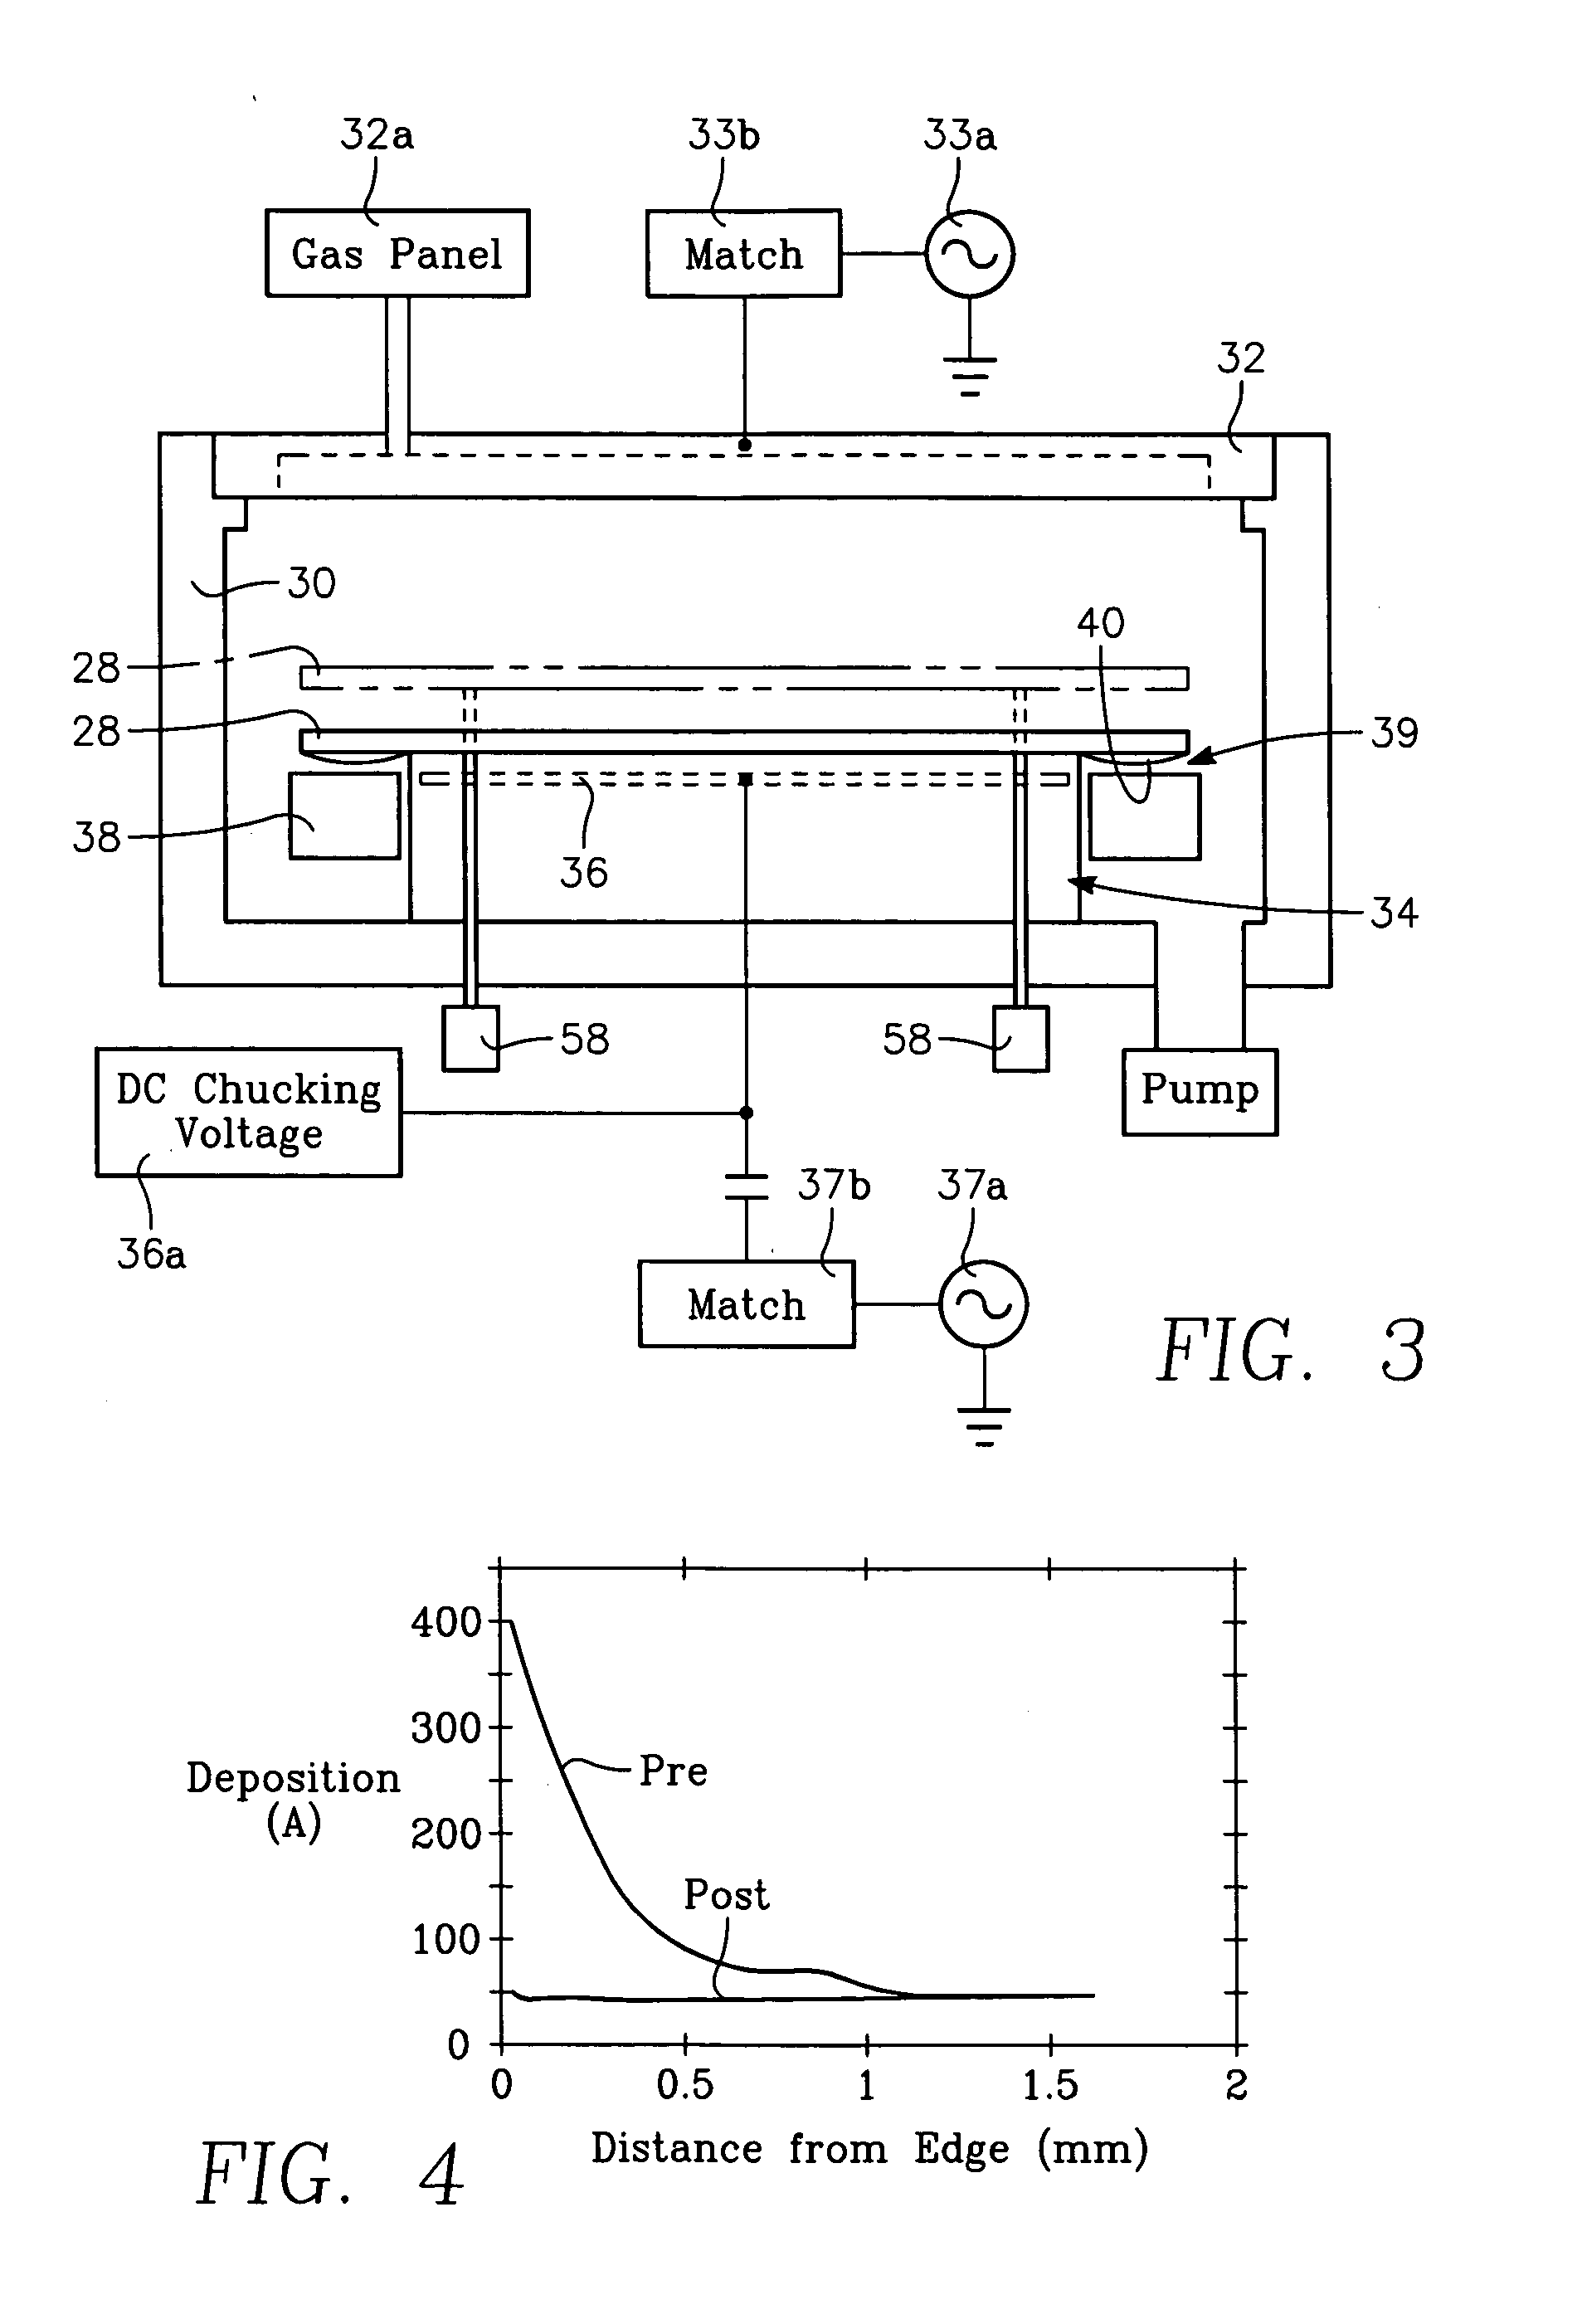 Plasma dielectric etch process including in-situ backside polymer removal for low-dielectric constant material